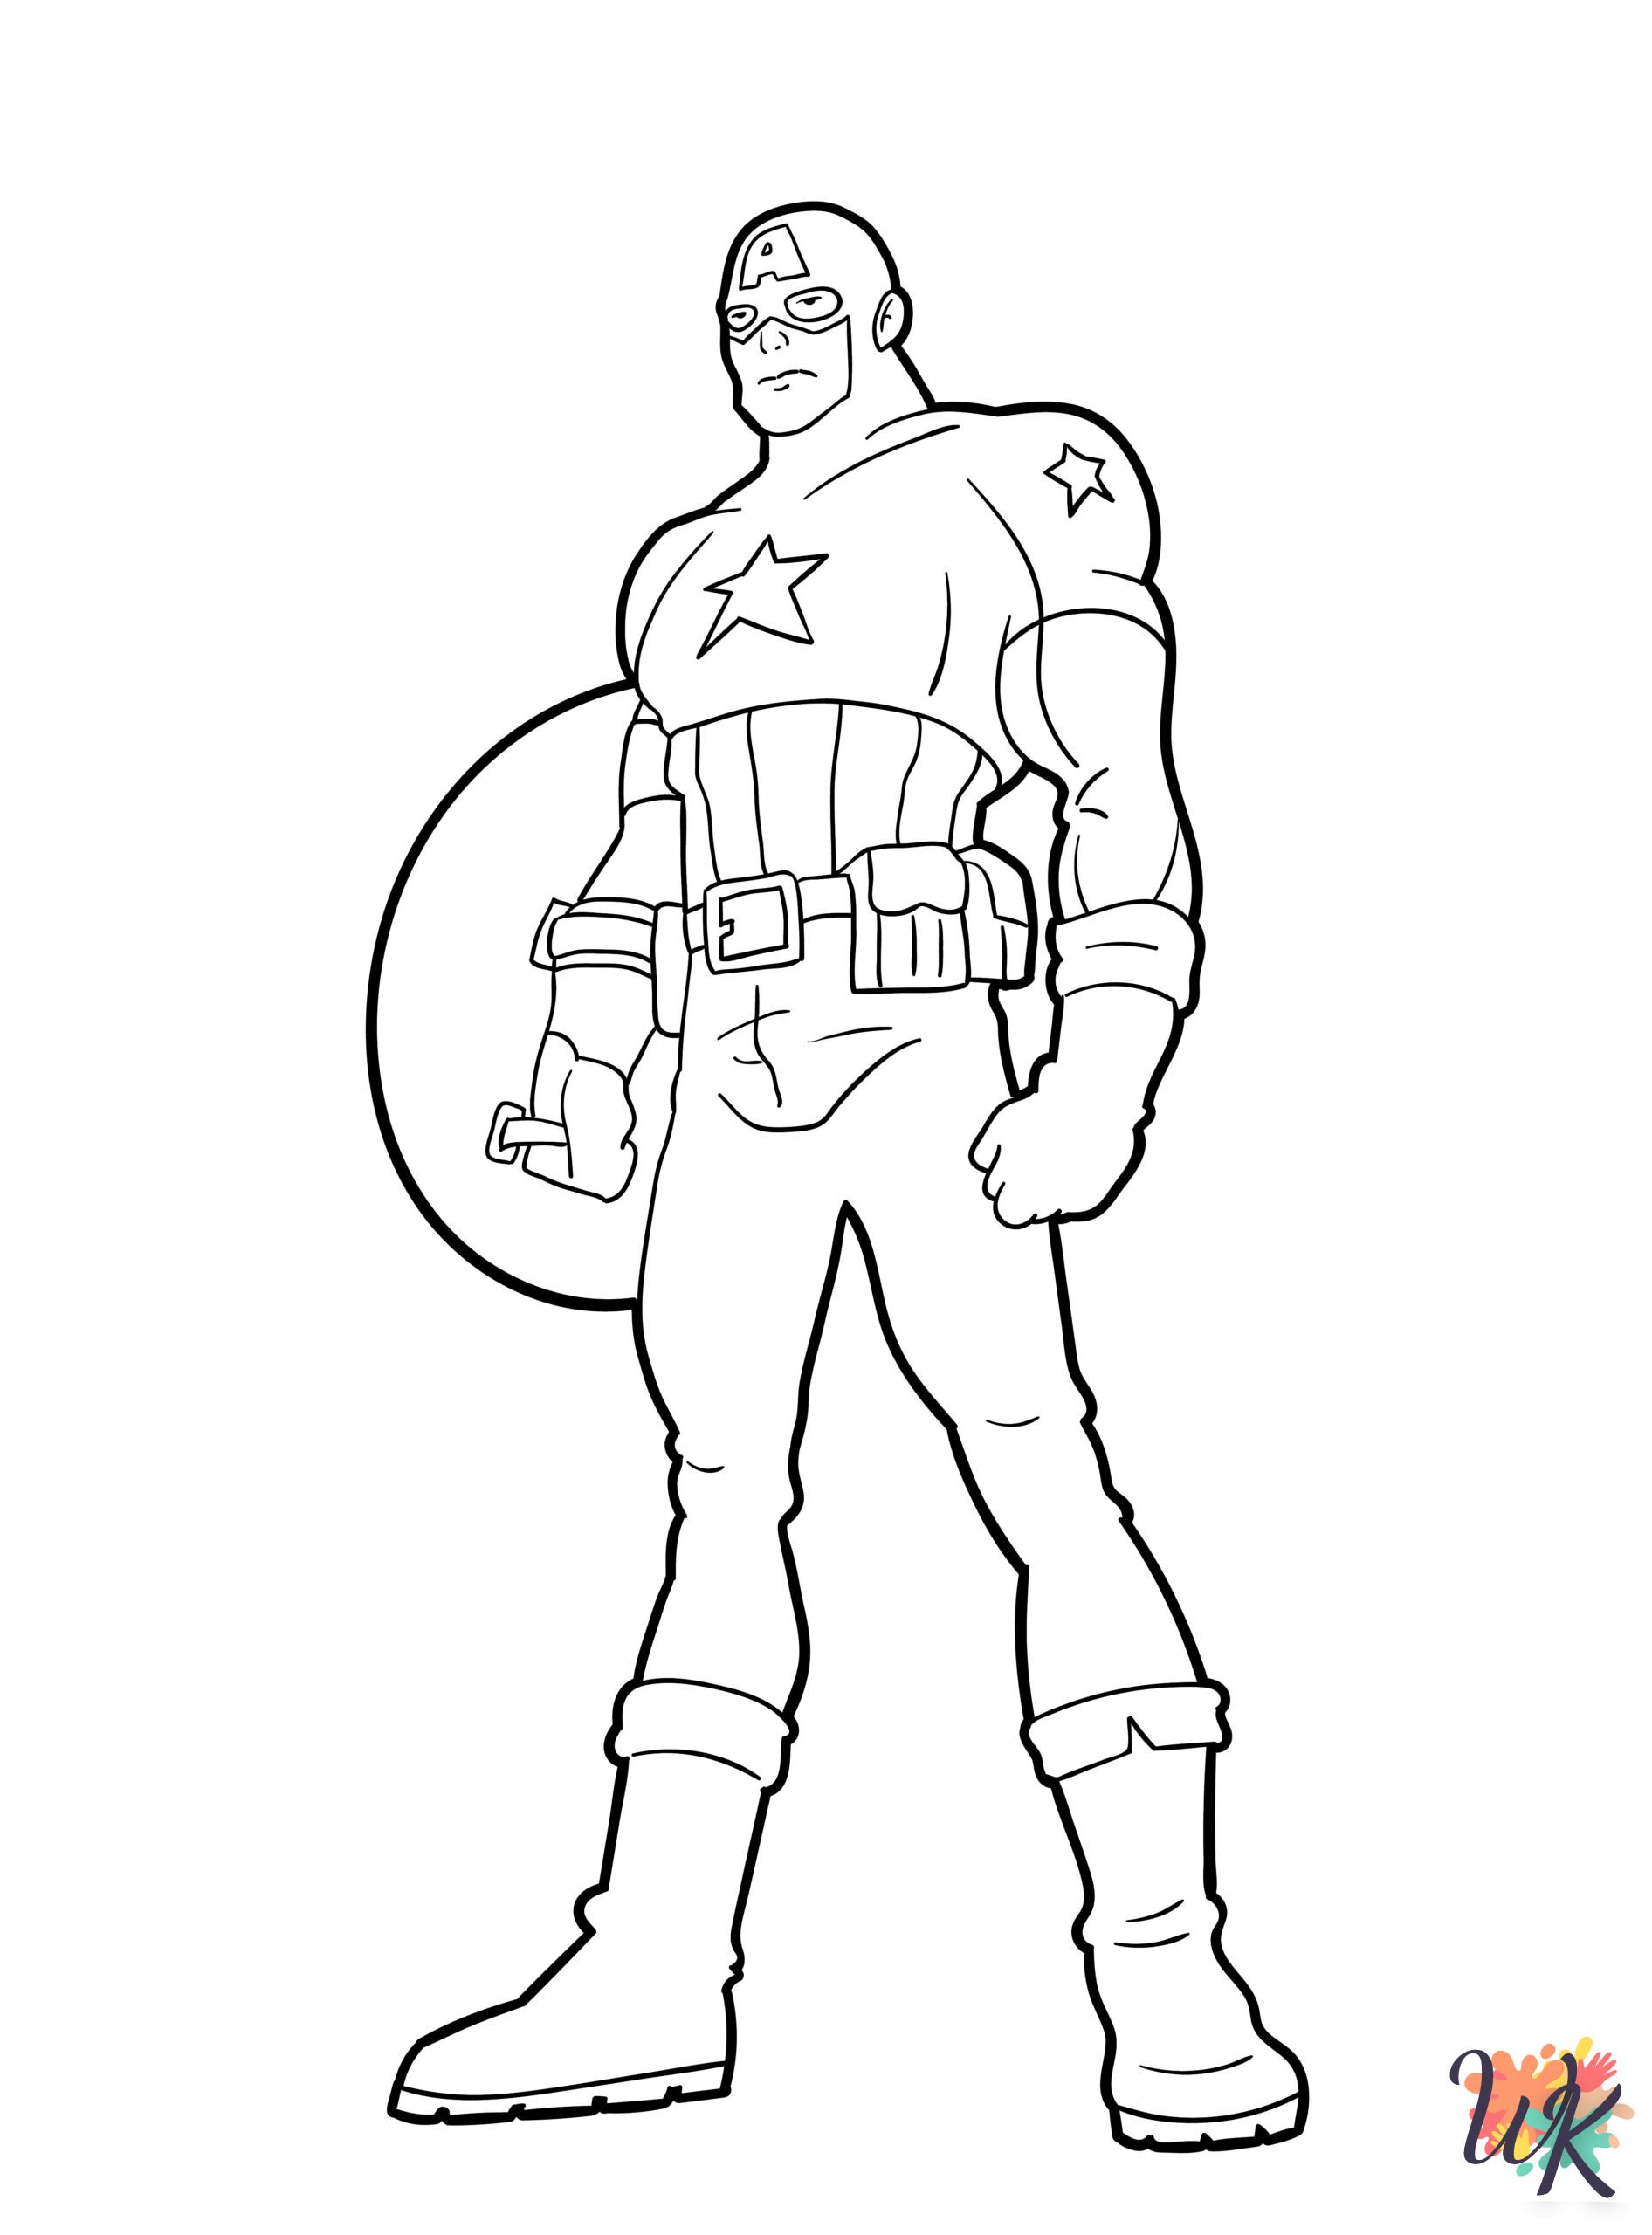 Captain America coloring pages for adults